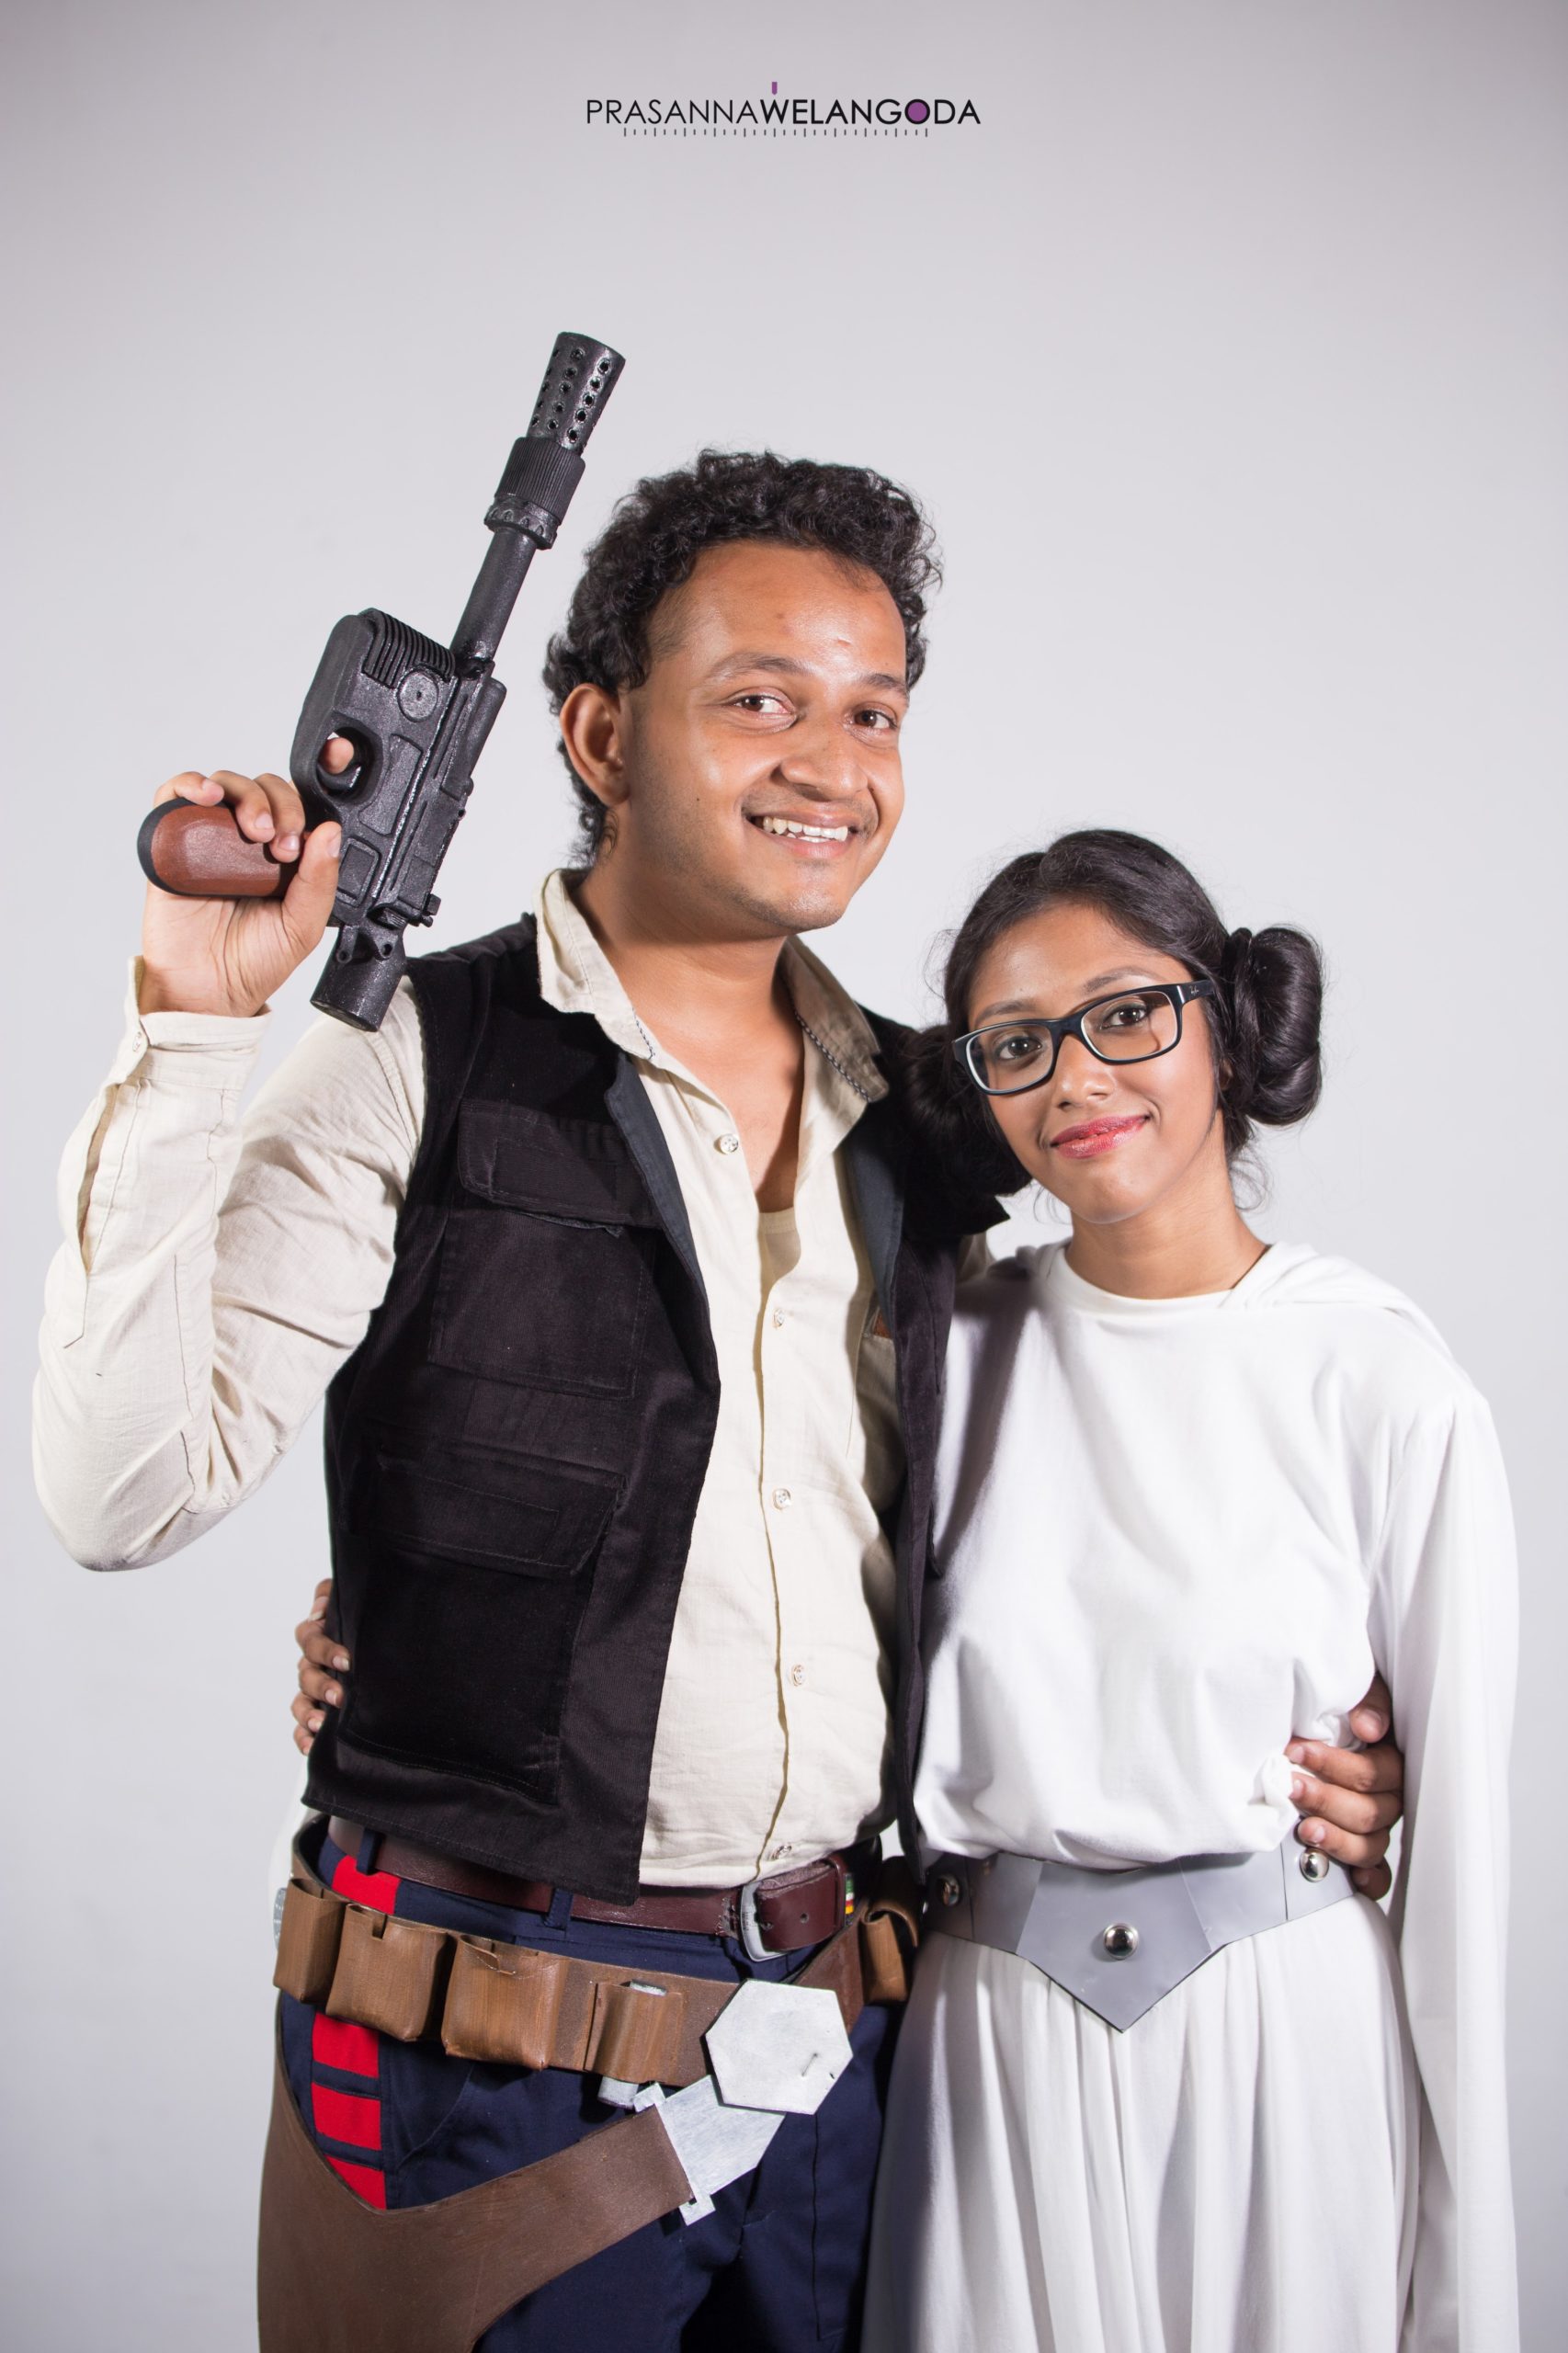 The Best Cosplay From Sri Lanka’s Comic Con